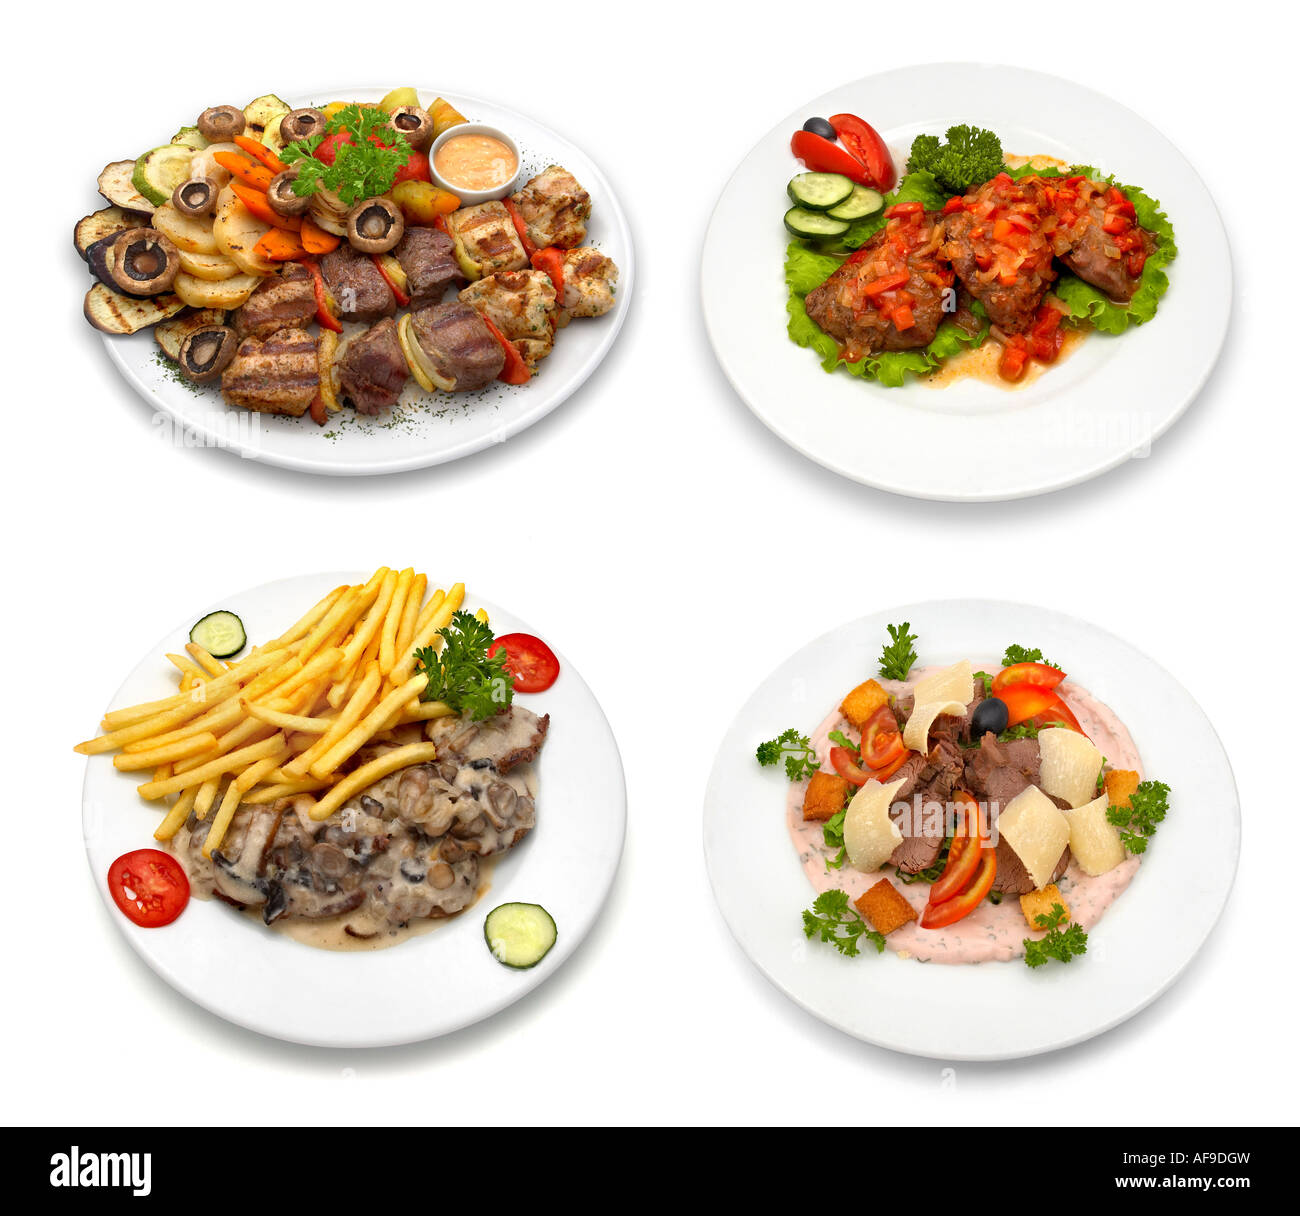 4 dishes with chicken, veal, pork meat and vegetables Stock Photo